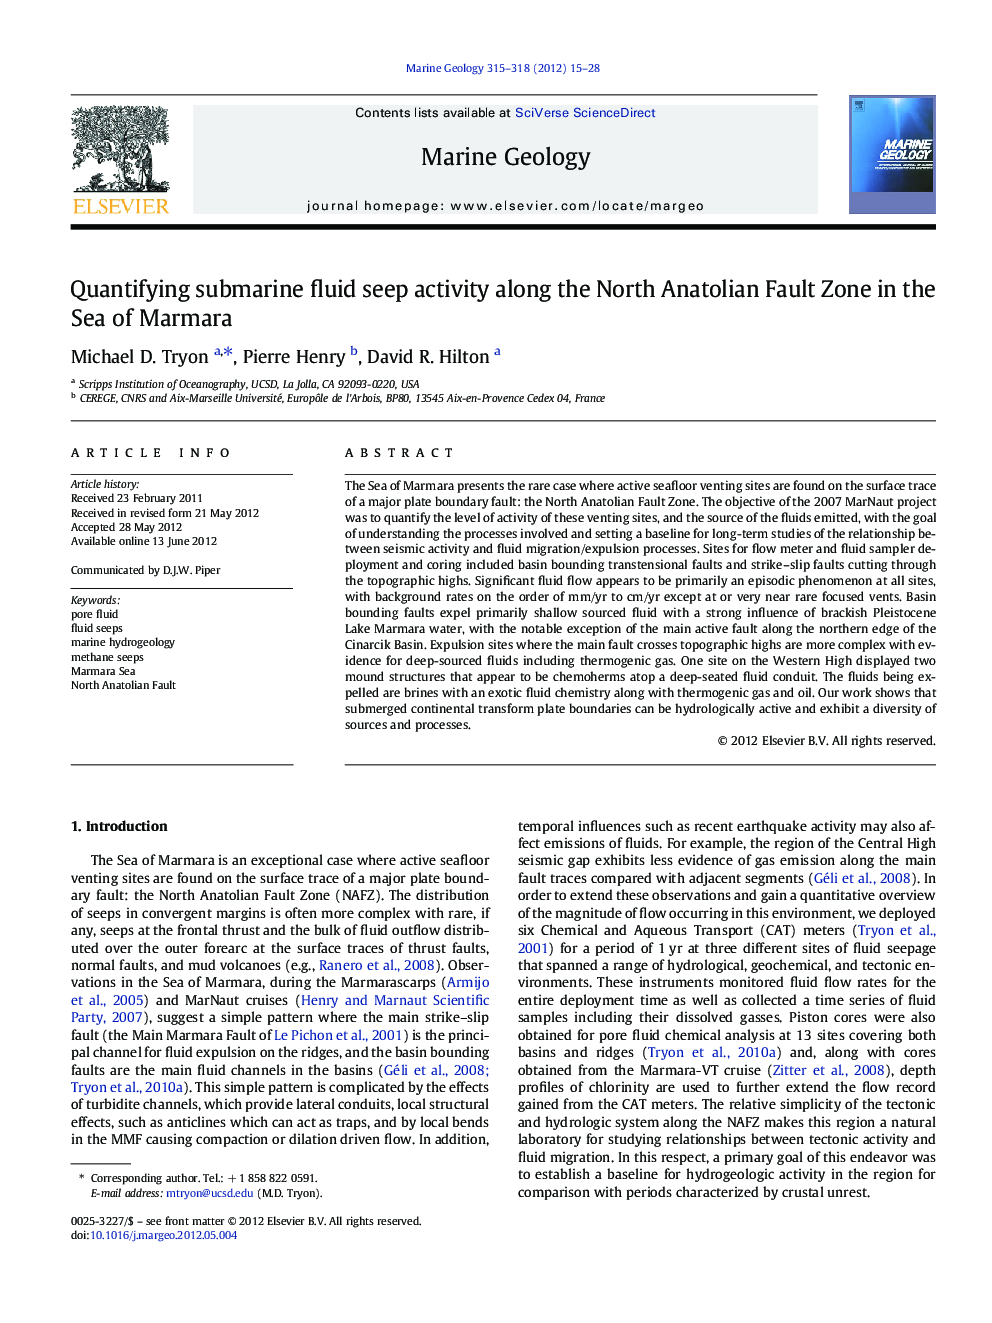 Quantifying submarine fluid seep activity along the North Anatolian Fault Zone in the Sea of Marmara